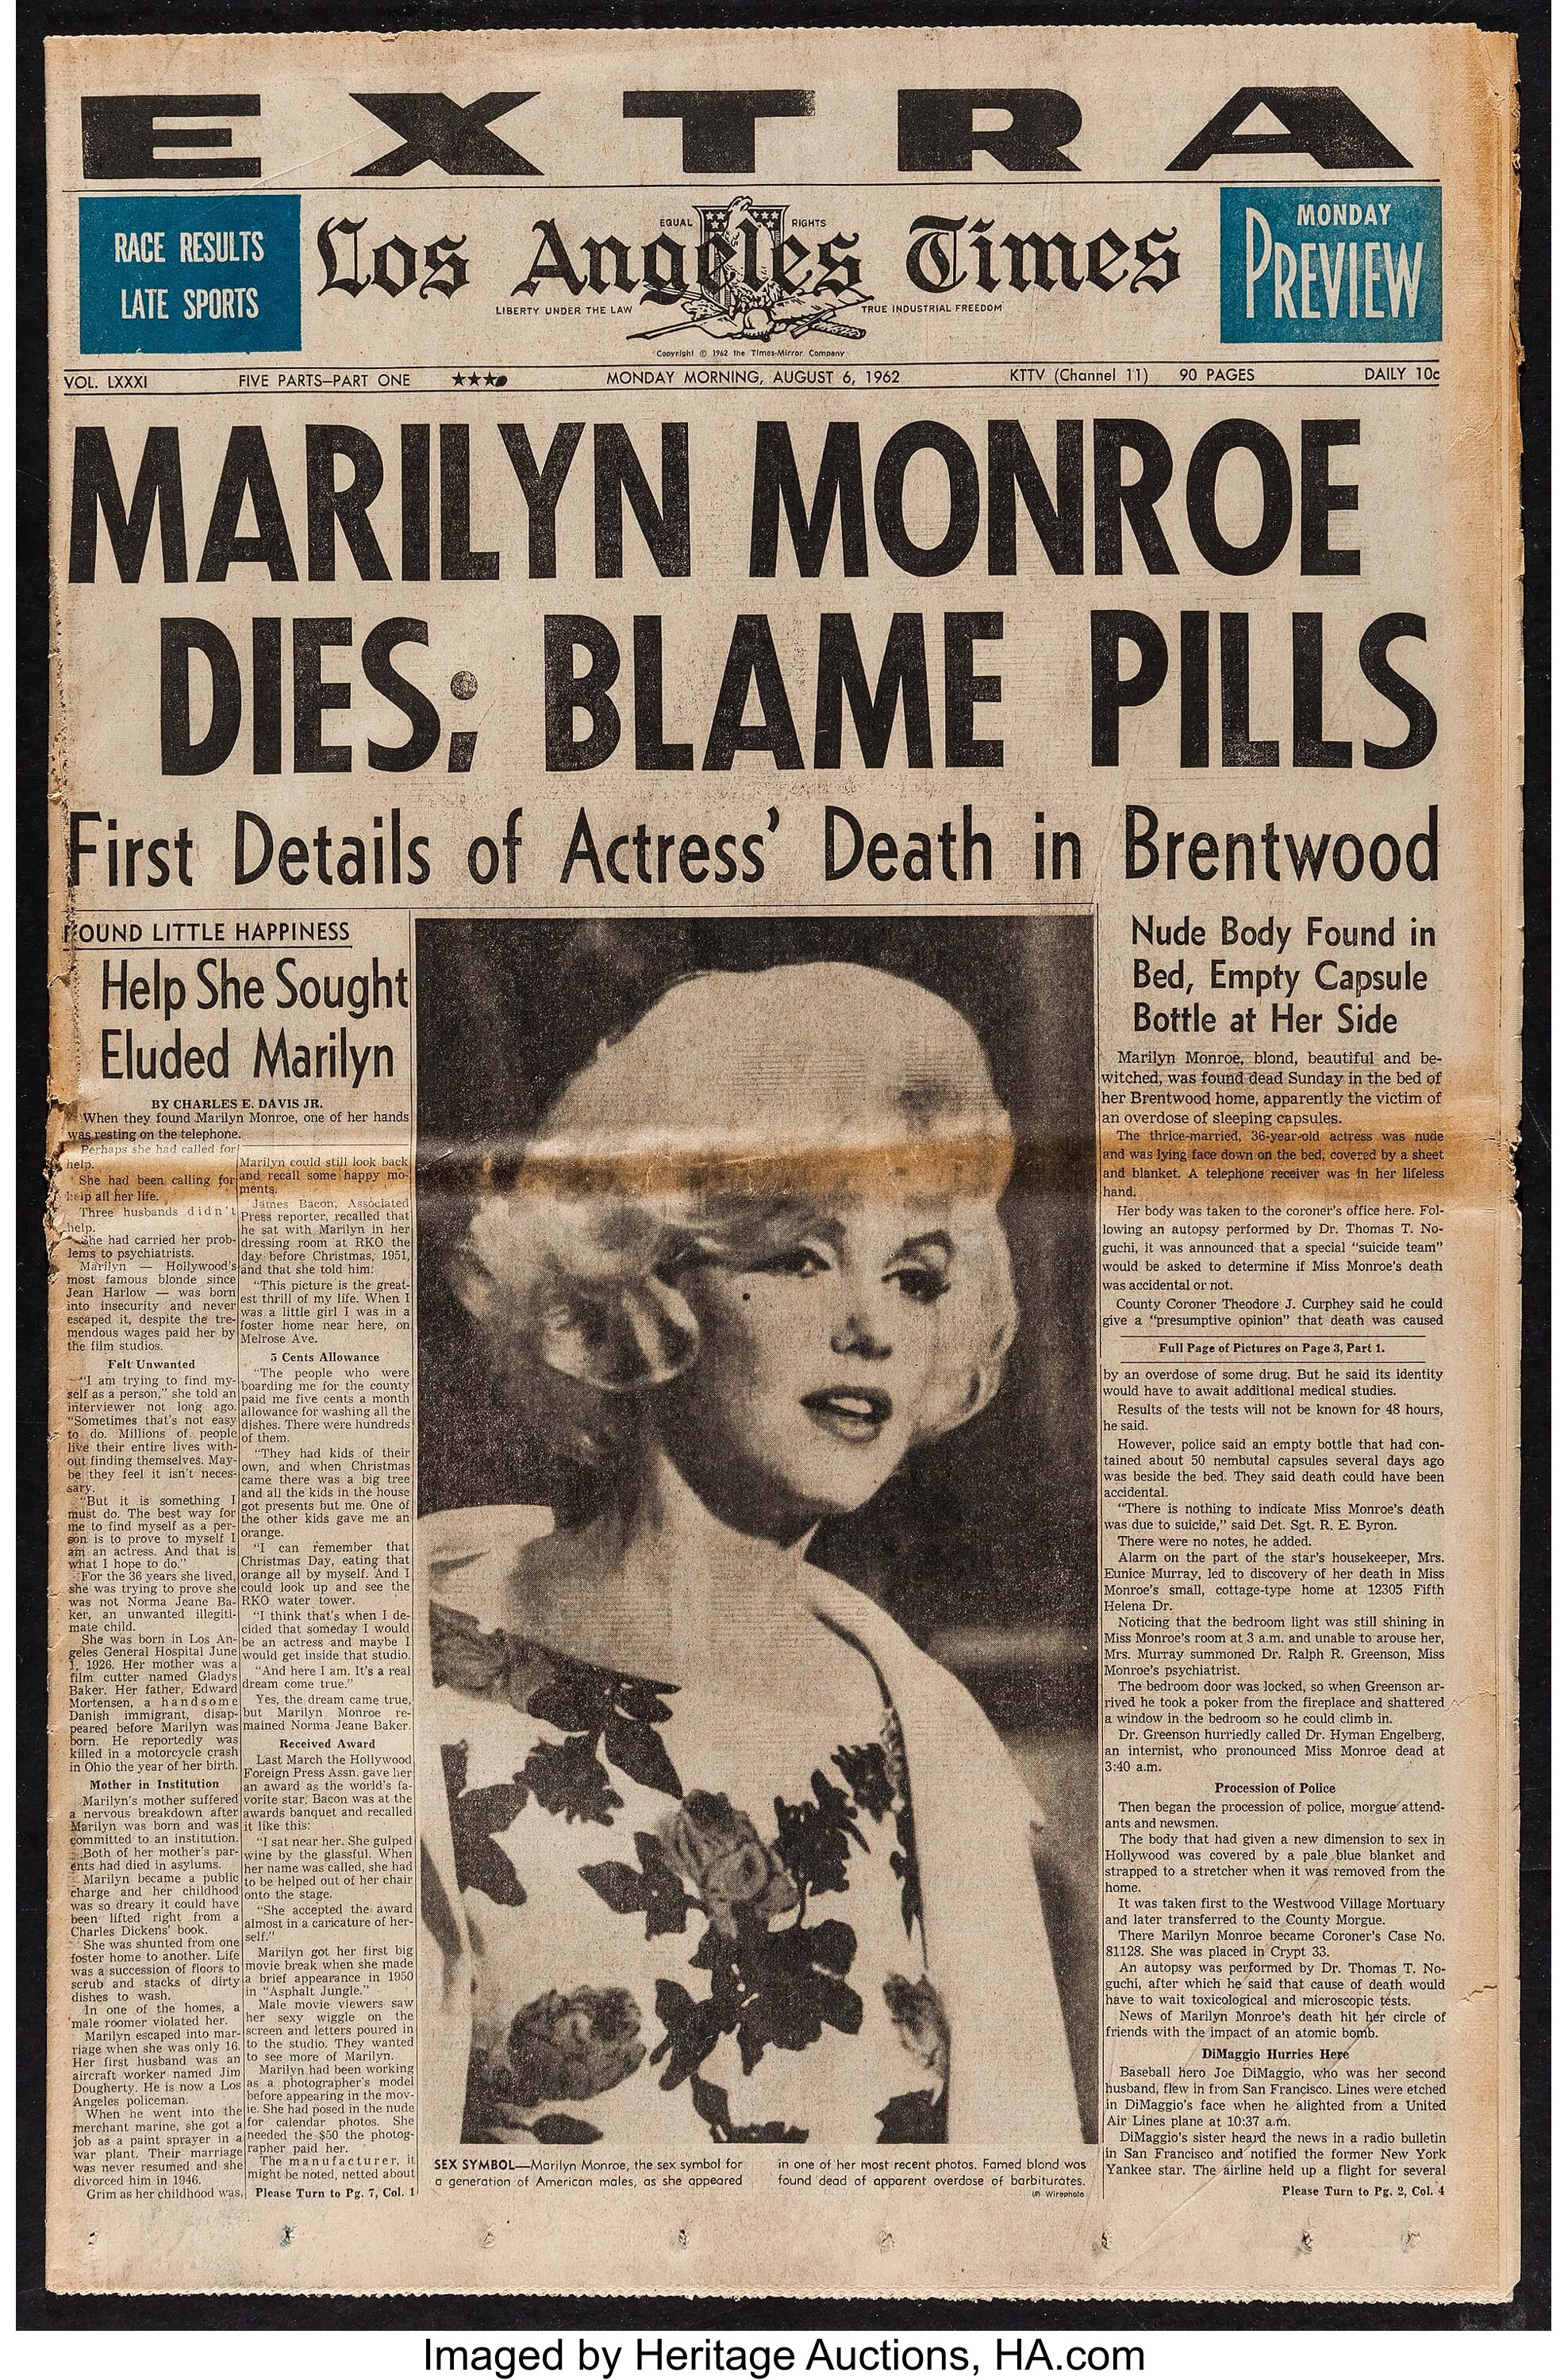 Los Angeles Times - Marilyn Monroe died 51 years ago, on August 5, 1962.  Here's the following day's L.A. Times front page. You can see it in a  larger format here, marilyn